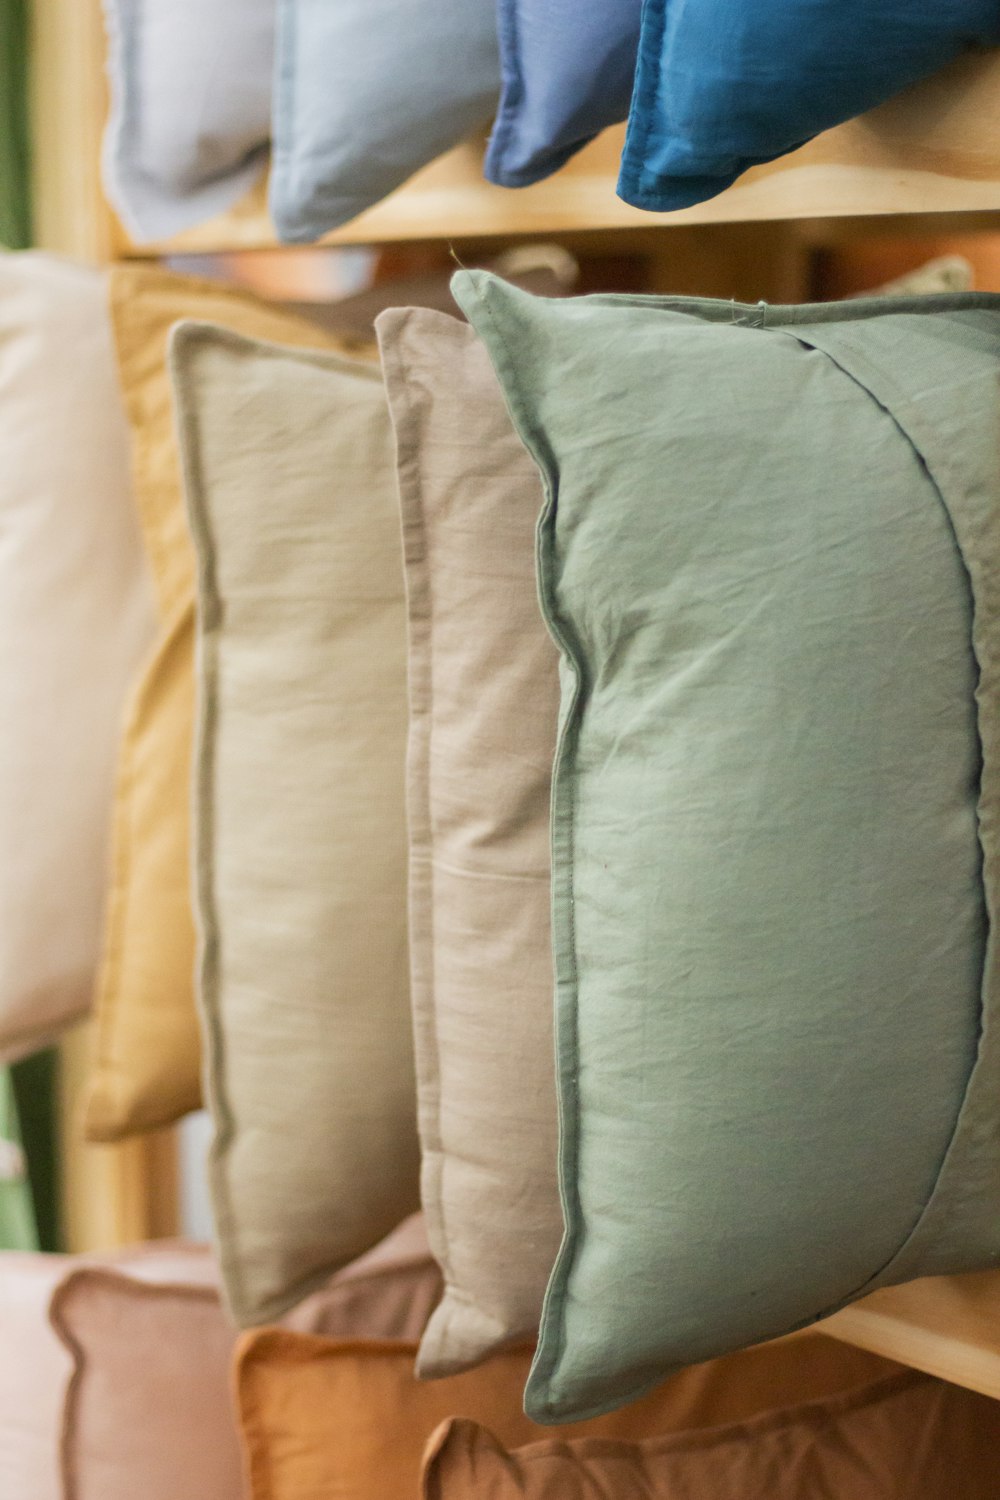 a row of pillows sitting on top of a wooden shelf